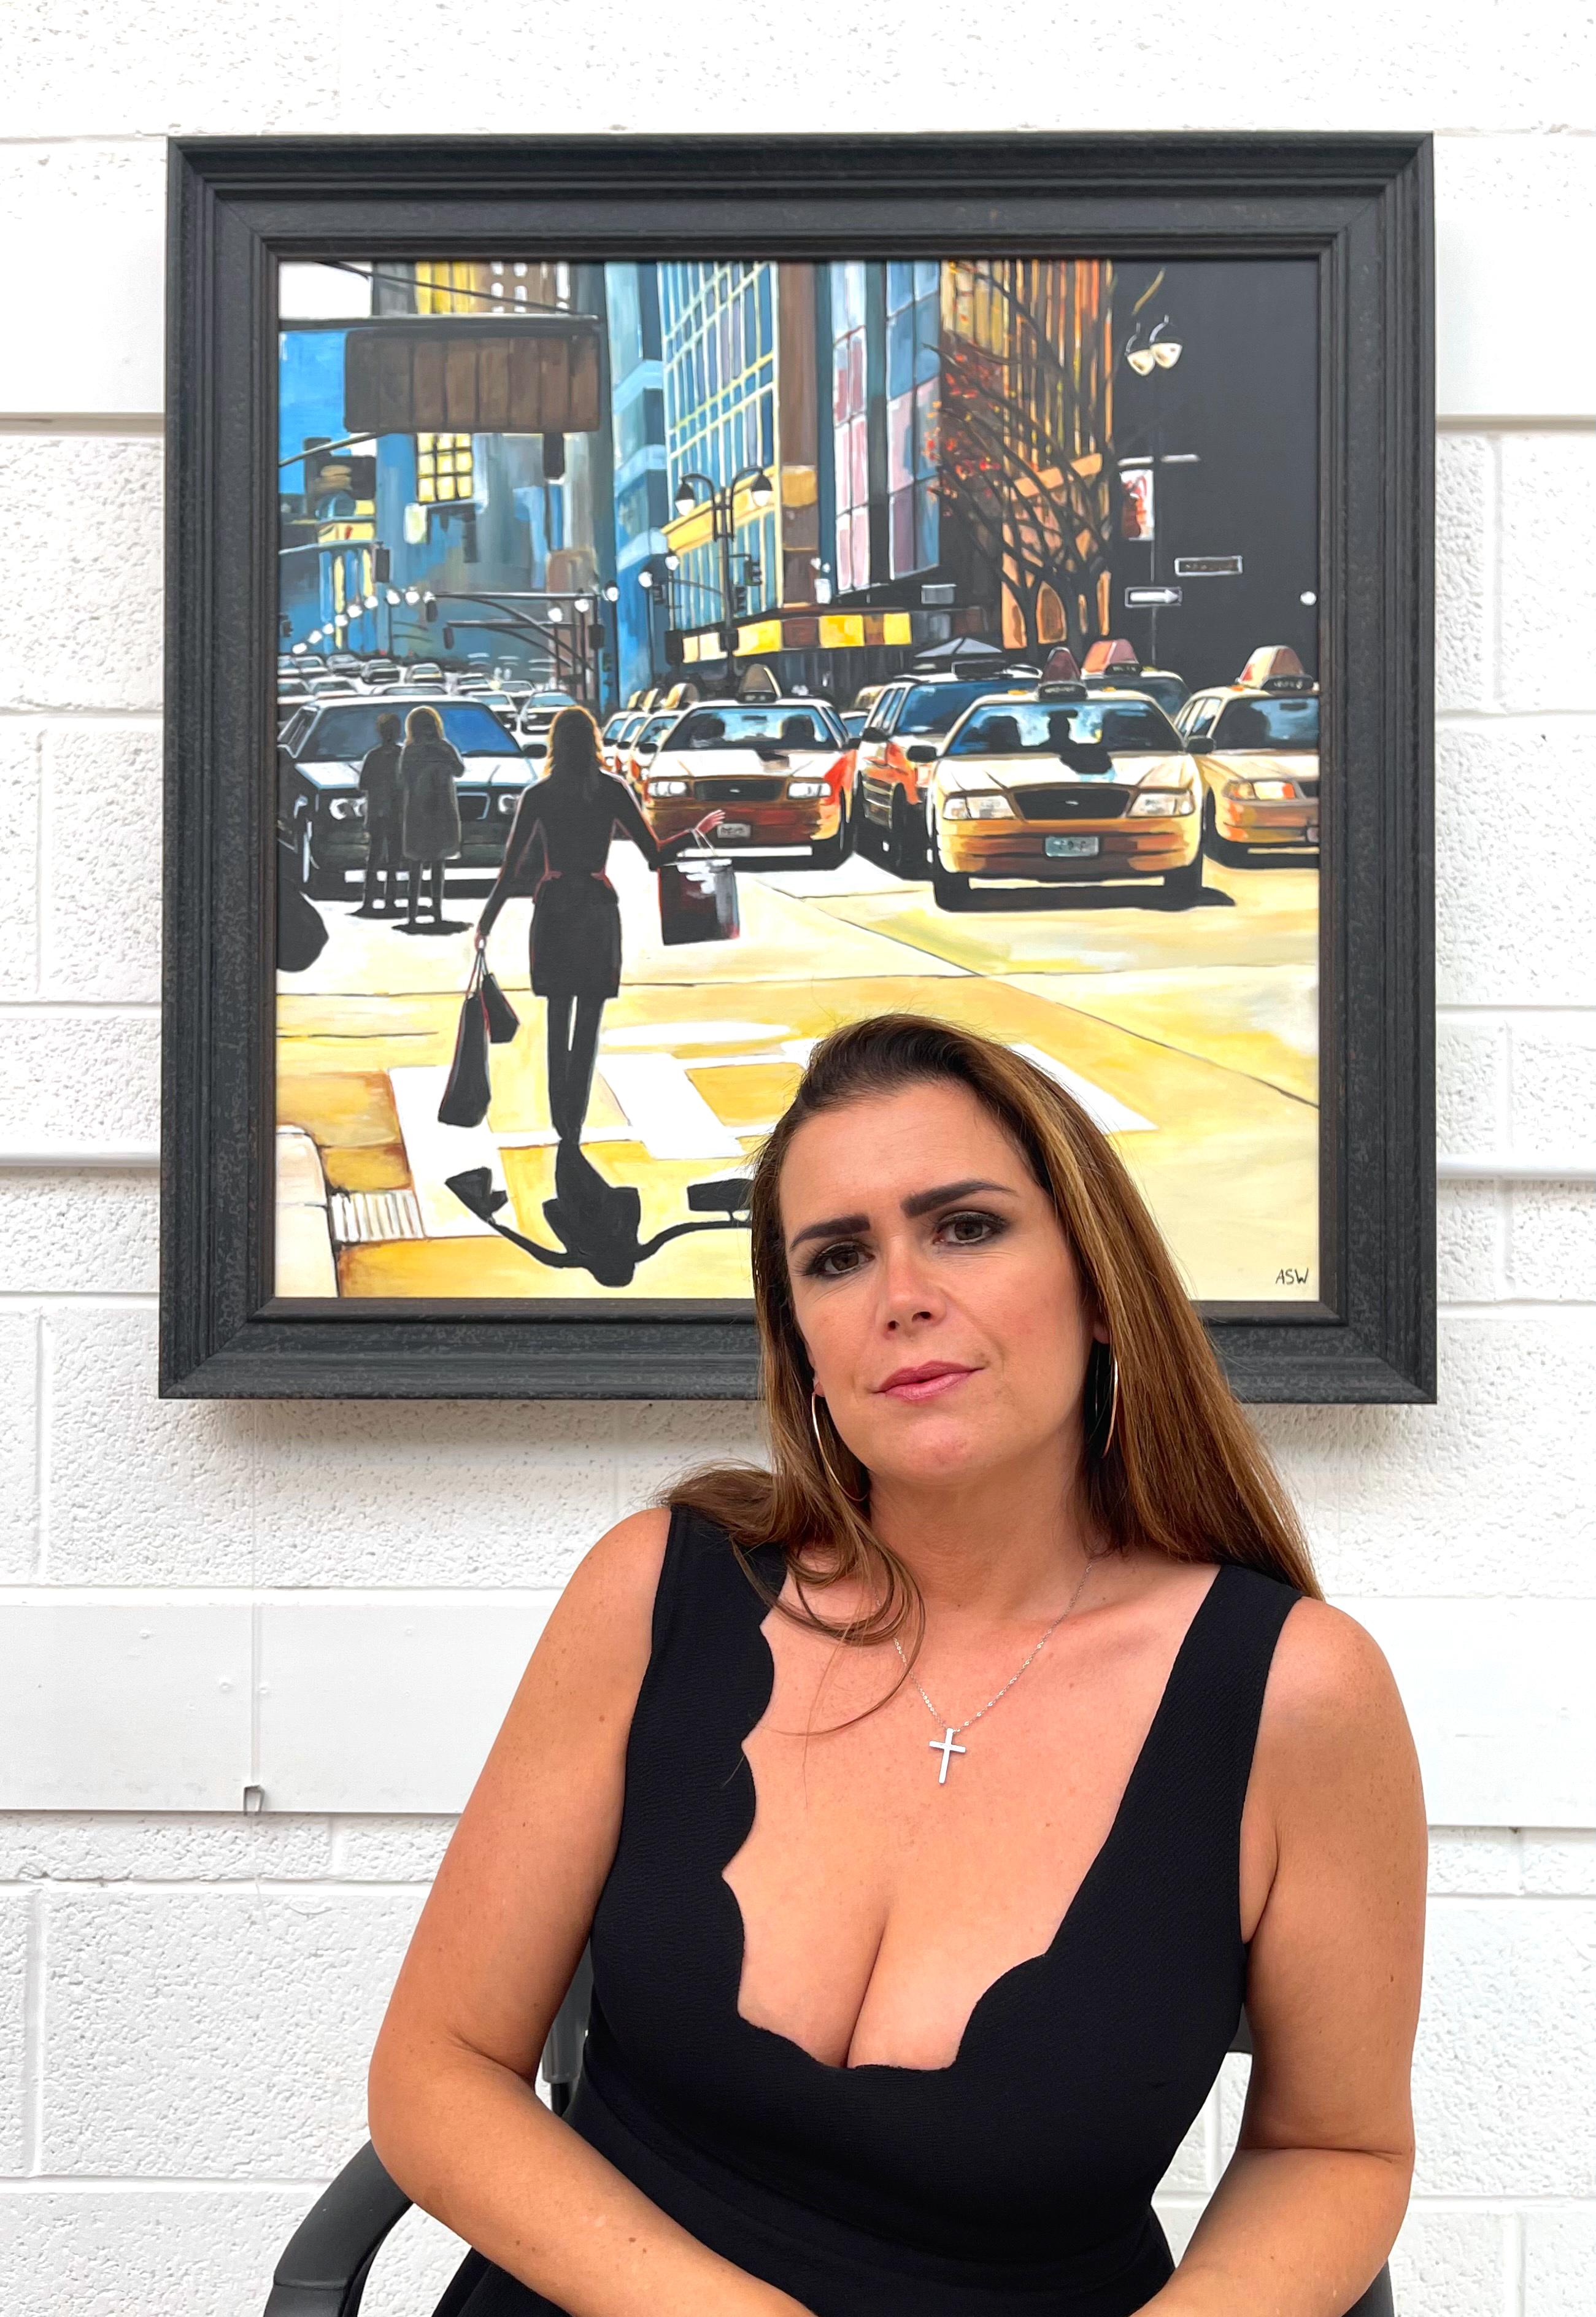 Female Figure Shopping in New York City Sunshine by Contemporary British Artist - Painting by Angela Wakefield